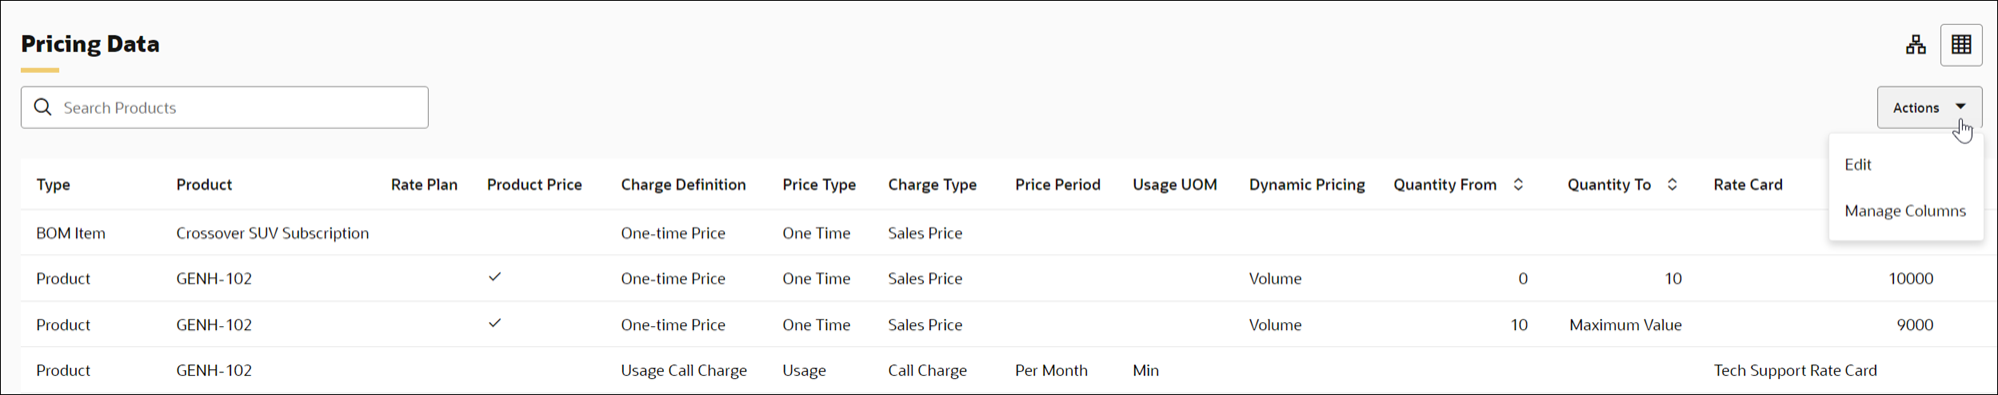 Pricing Details - Table View